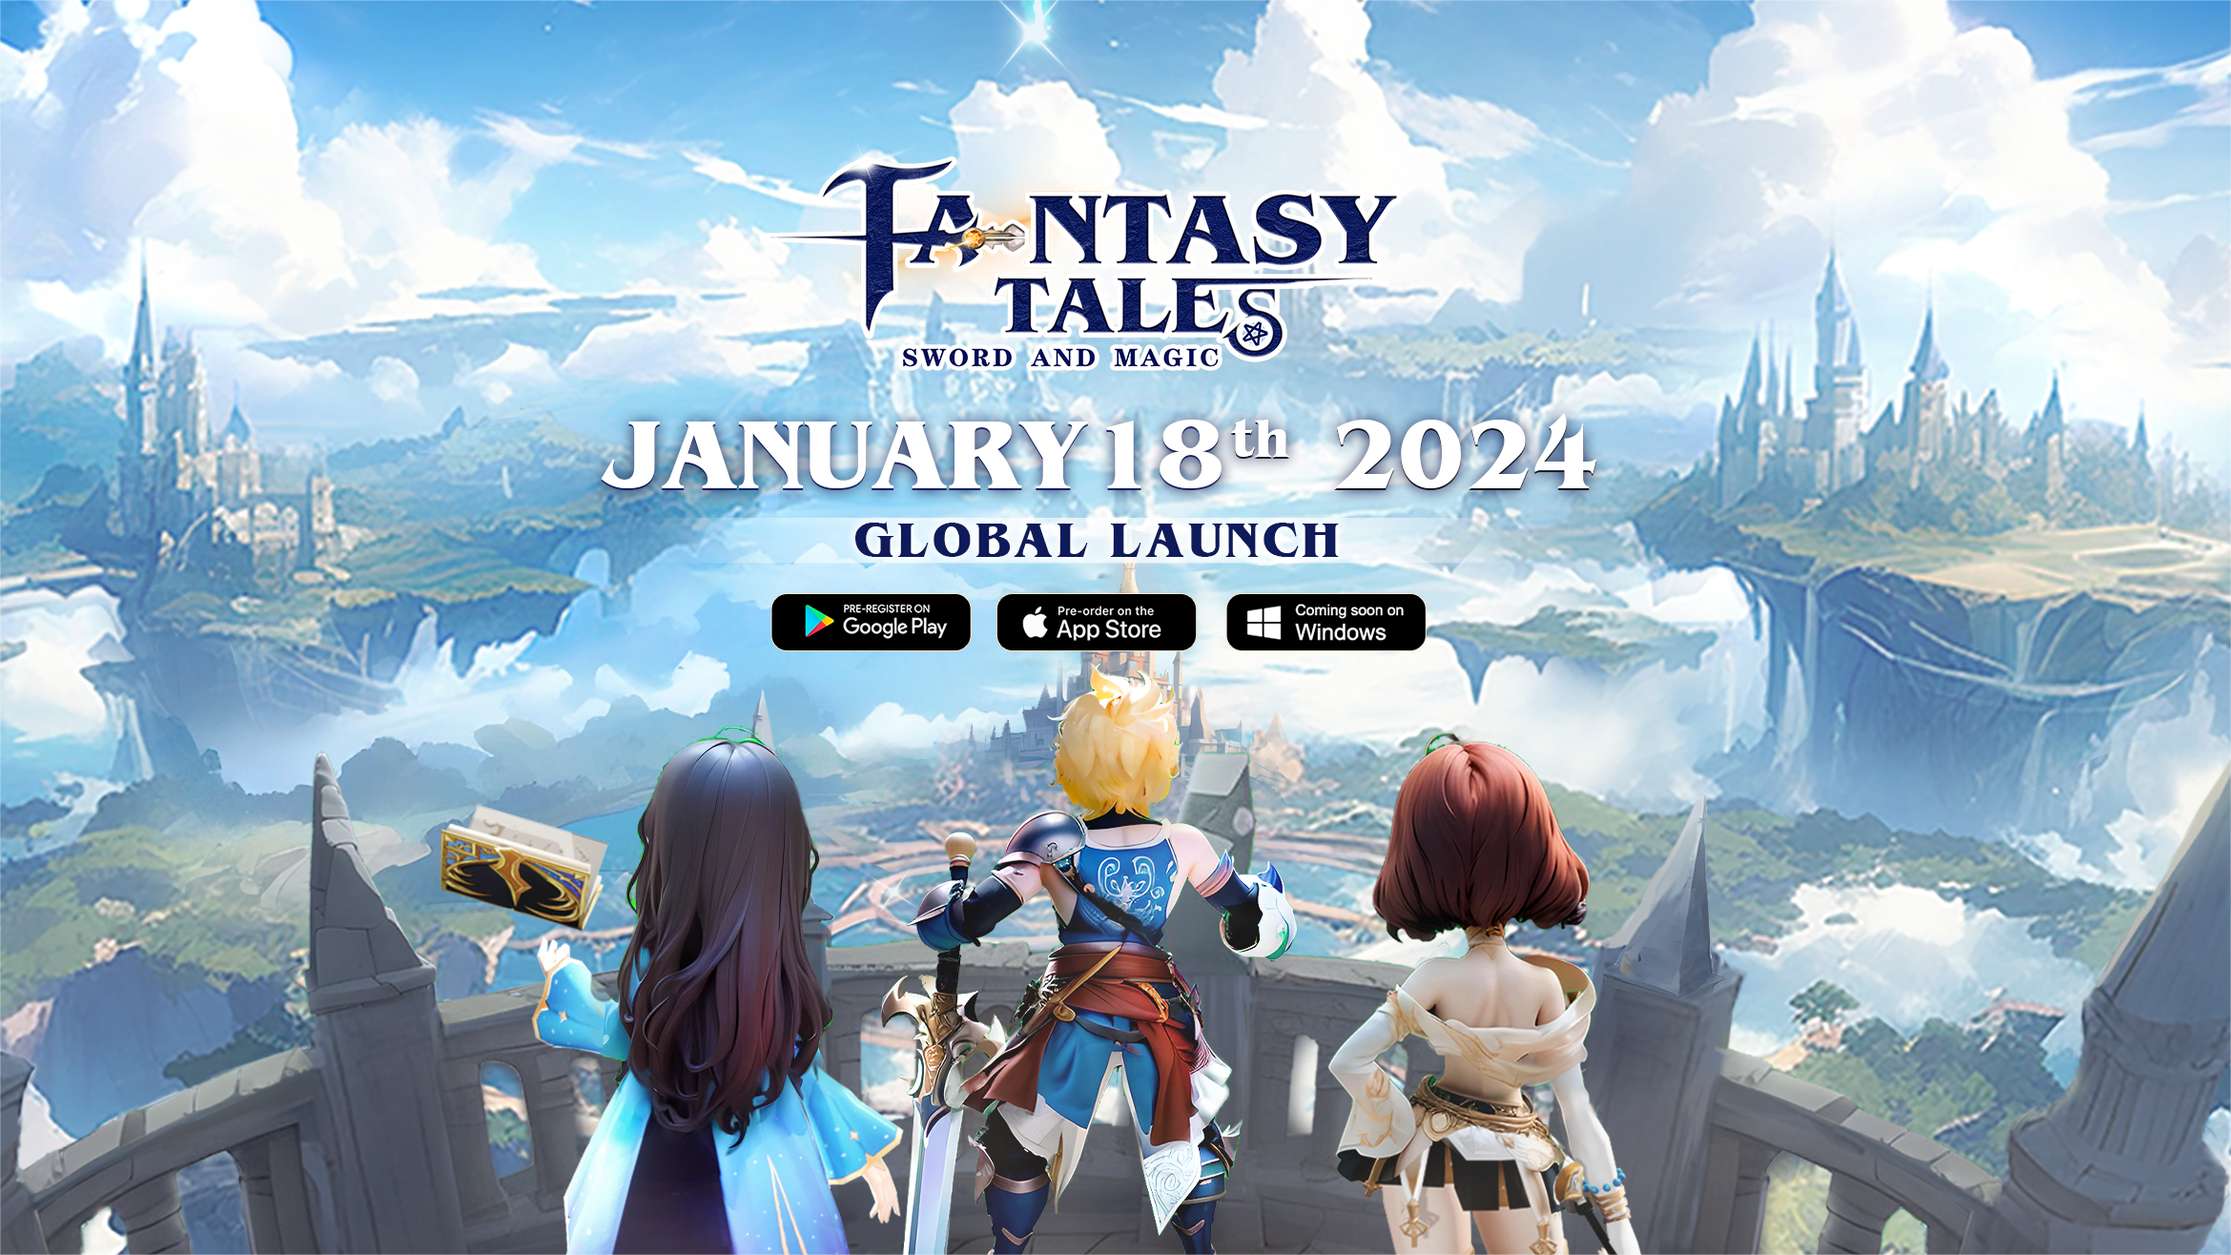 play fantasy tales sword and magic on pc